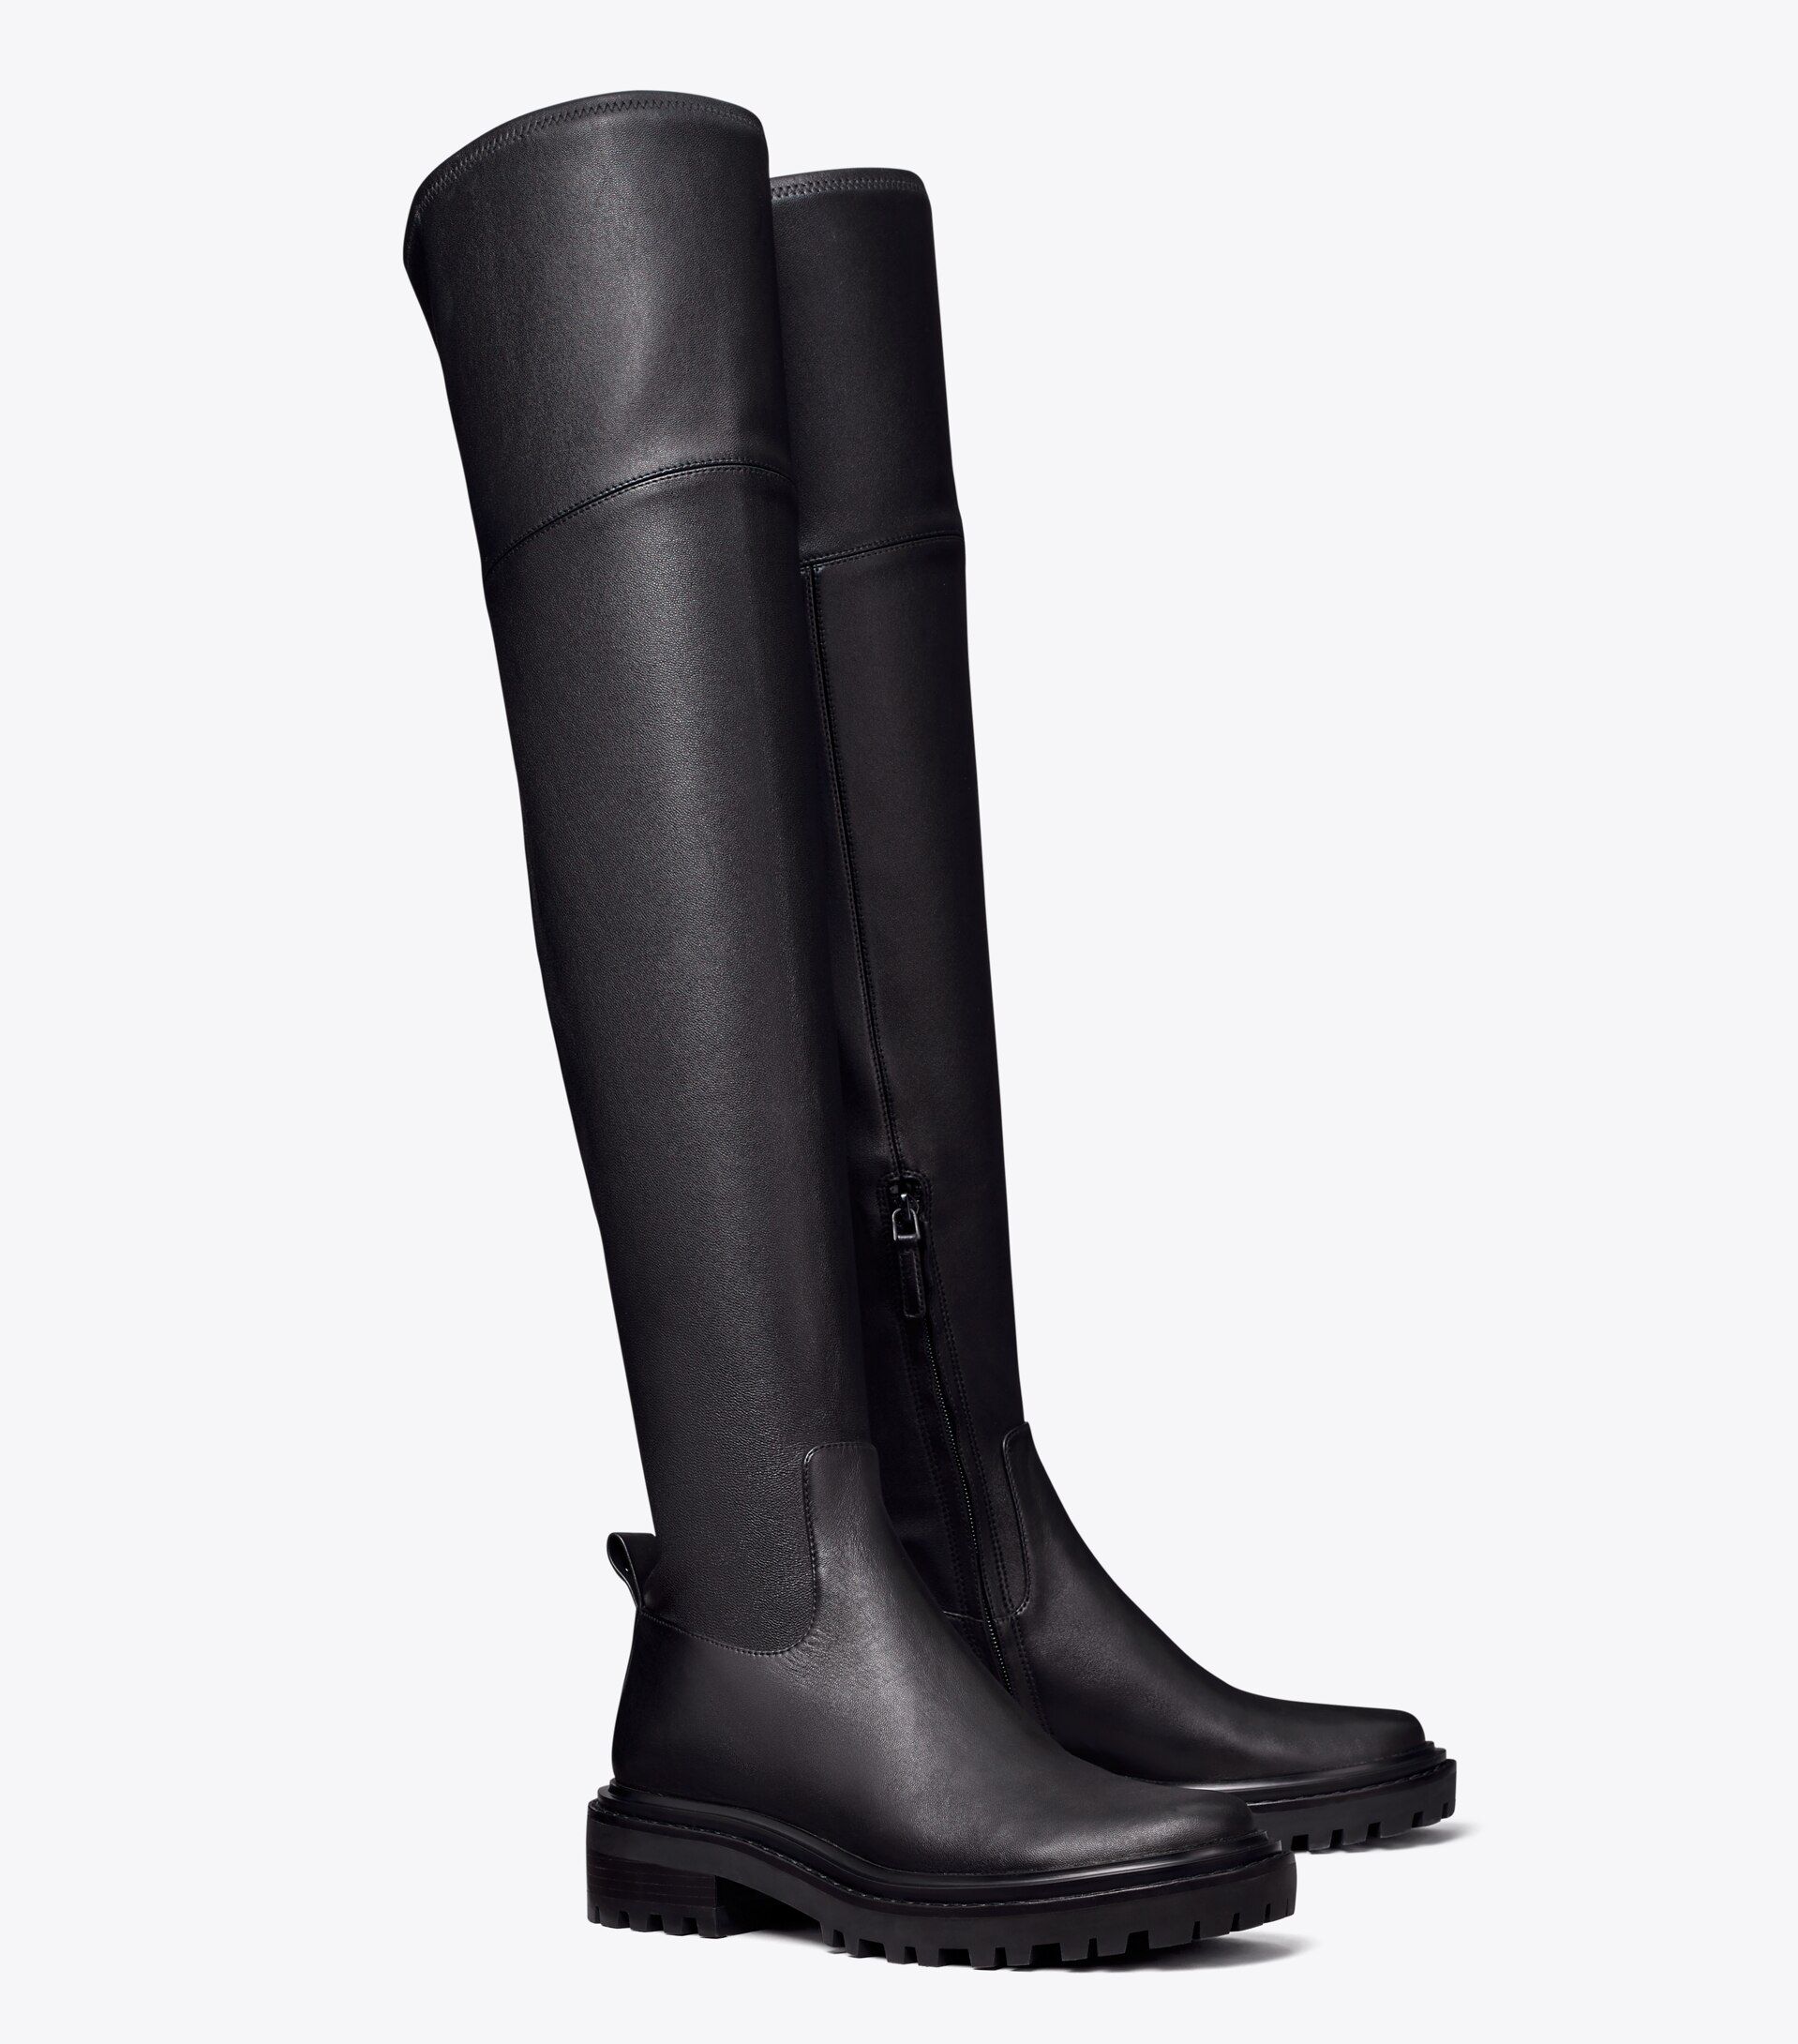 Utility Lug Over-the-Knee Boot: Women's Designer Boots | Tory Burch | Tory Burch (US)